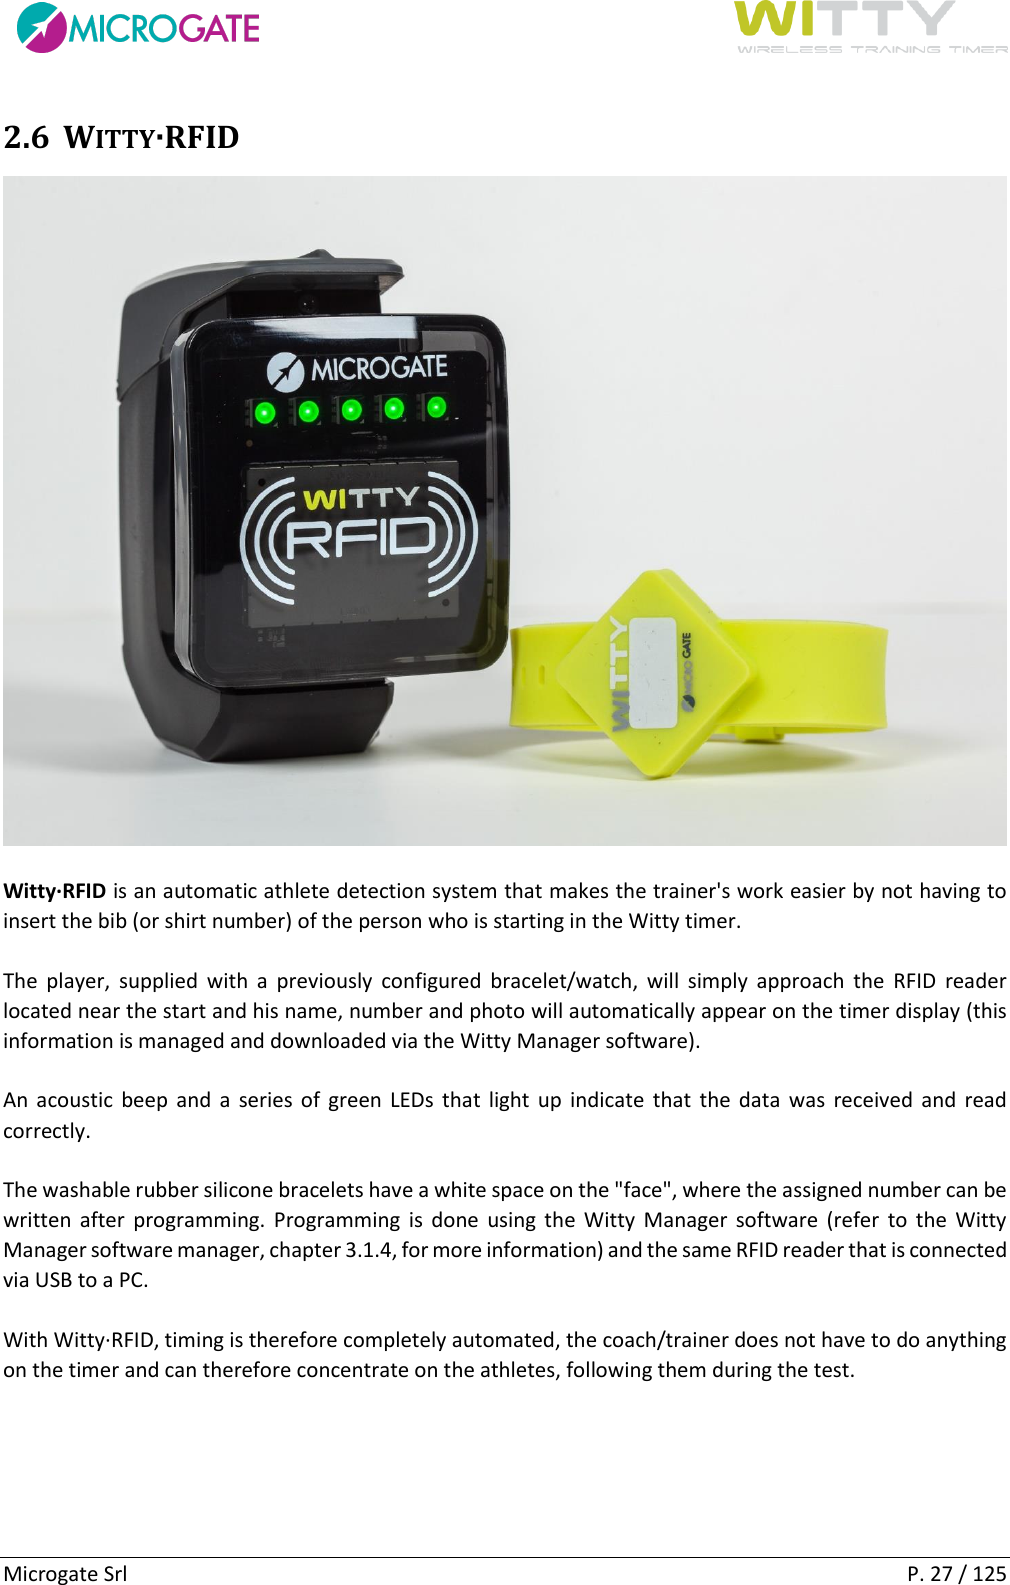      Microgate Srl    P. 27 / 125 2.6 WITTY·RFID  Witty·RFID is an automatic athlete detection system that makes the trainer&apos;s work easier by not having to insert the bib (or shirt number) of the person who is starting in the Witty timer. The  player,  supplied  with  a  previously  configured  bracelet/watch,  will  simply  approach  the  RFID  reader located near the start and his name, number and photo will automatically appear on the timer display (this information is managed and downloaded via the Witty Manager software). An acoustic  beep  and  a  series of  green LEDs  that  light up indicate  that  the  data  was  received and  read correctly. The washable rubber silicone bracelets have a white space on the &quot;face&quot;, where the assigned number can be written  after  programming. Programming is  done  using  the  Witty  Manager  software  (refer  to the  Witty Manager software manager, chapter 3.1.4, for more information) and the same RFID reader that is connected via USB to a PC. With Witty·RFID, timing is therefore completely automated, the coach/trainer does not have to do anything on the timer and can therefore concentrate on the athletes, following them during the test.   